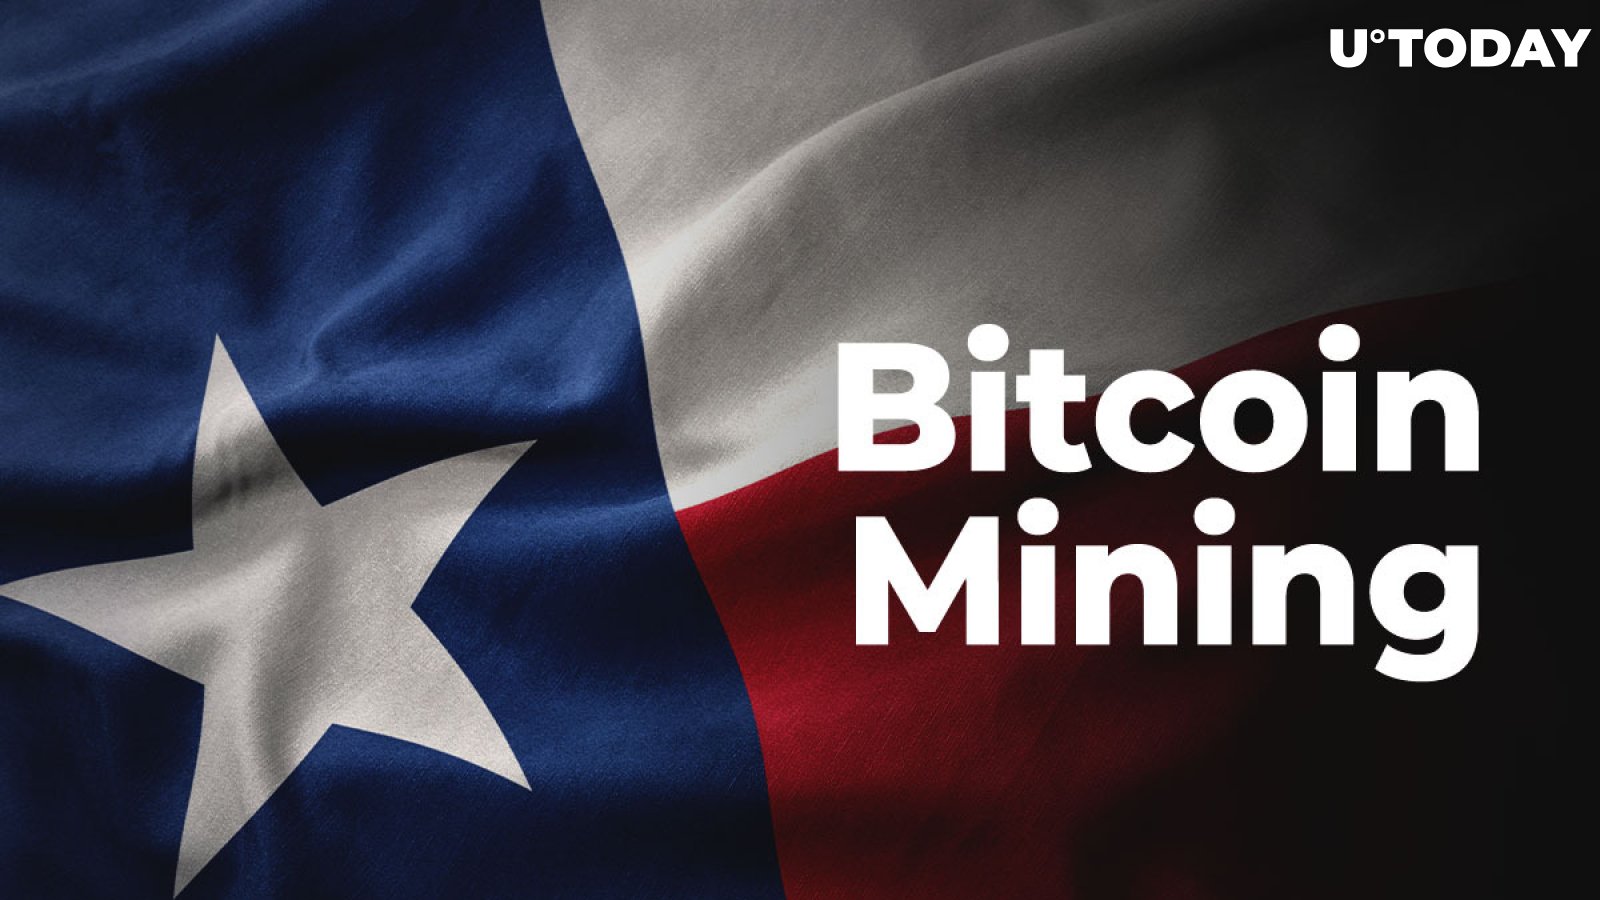 Texas-Based Bitcoin Mining Startup Now Relies on Virtual Power Plant